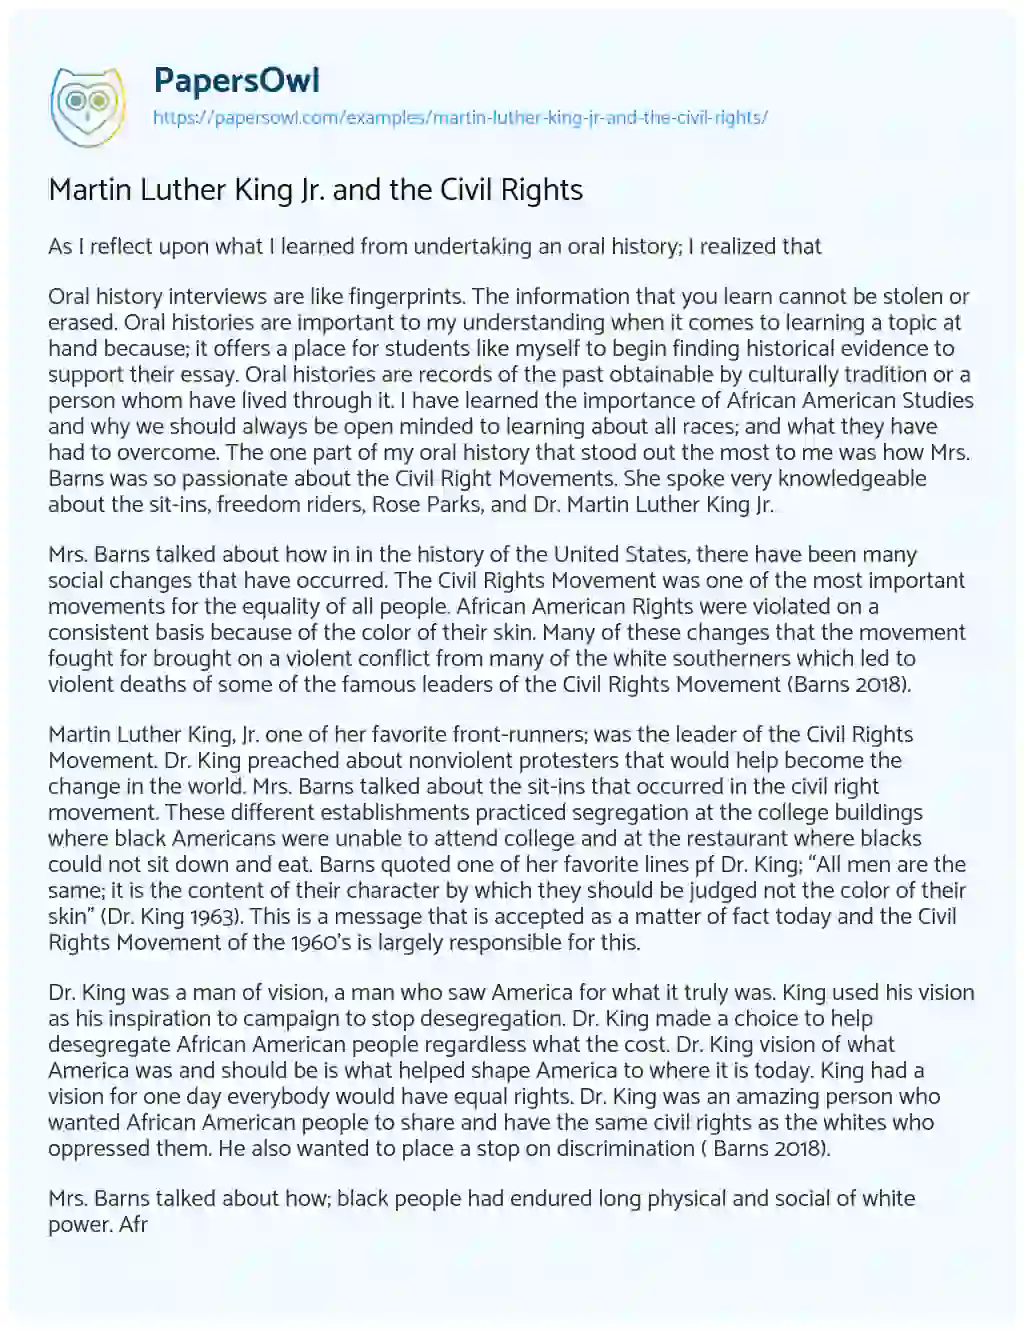 Essay on Martin Luther King Jr. and the Civil Rights